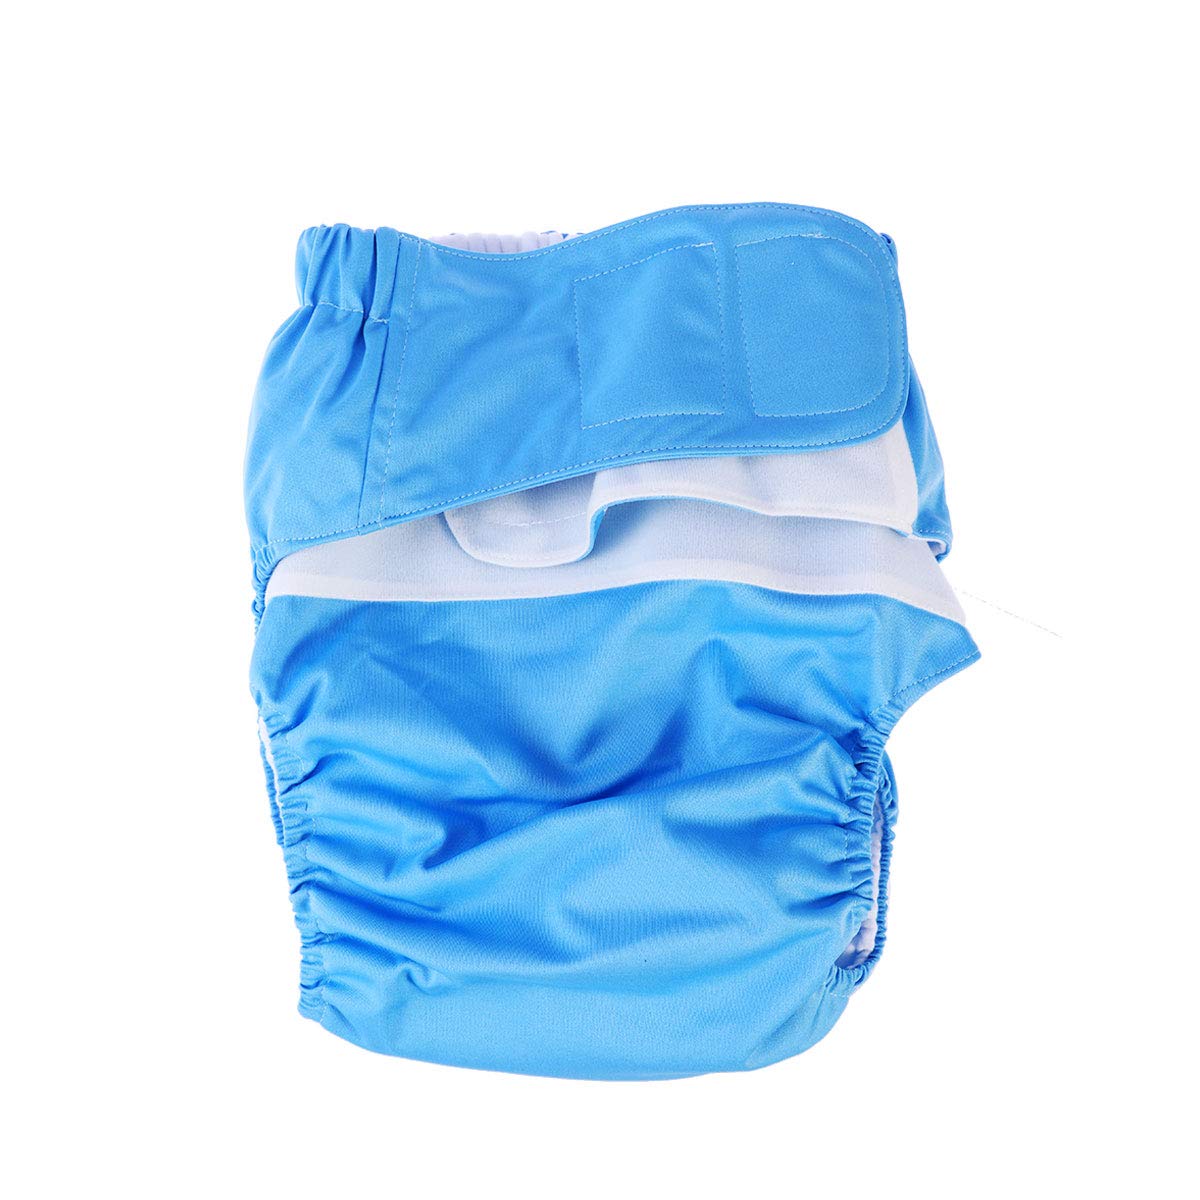 Healifty Washable underwear2pcs Adult Diapers Covers Reusable Incontinence Pants  Cloth Diaper Wraps Washable Overnight Leakfree Underwear